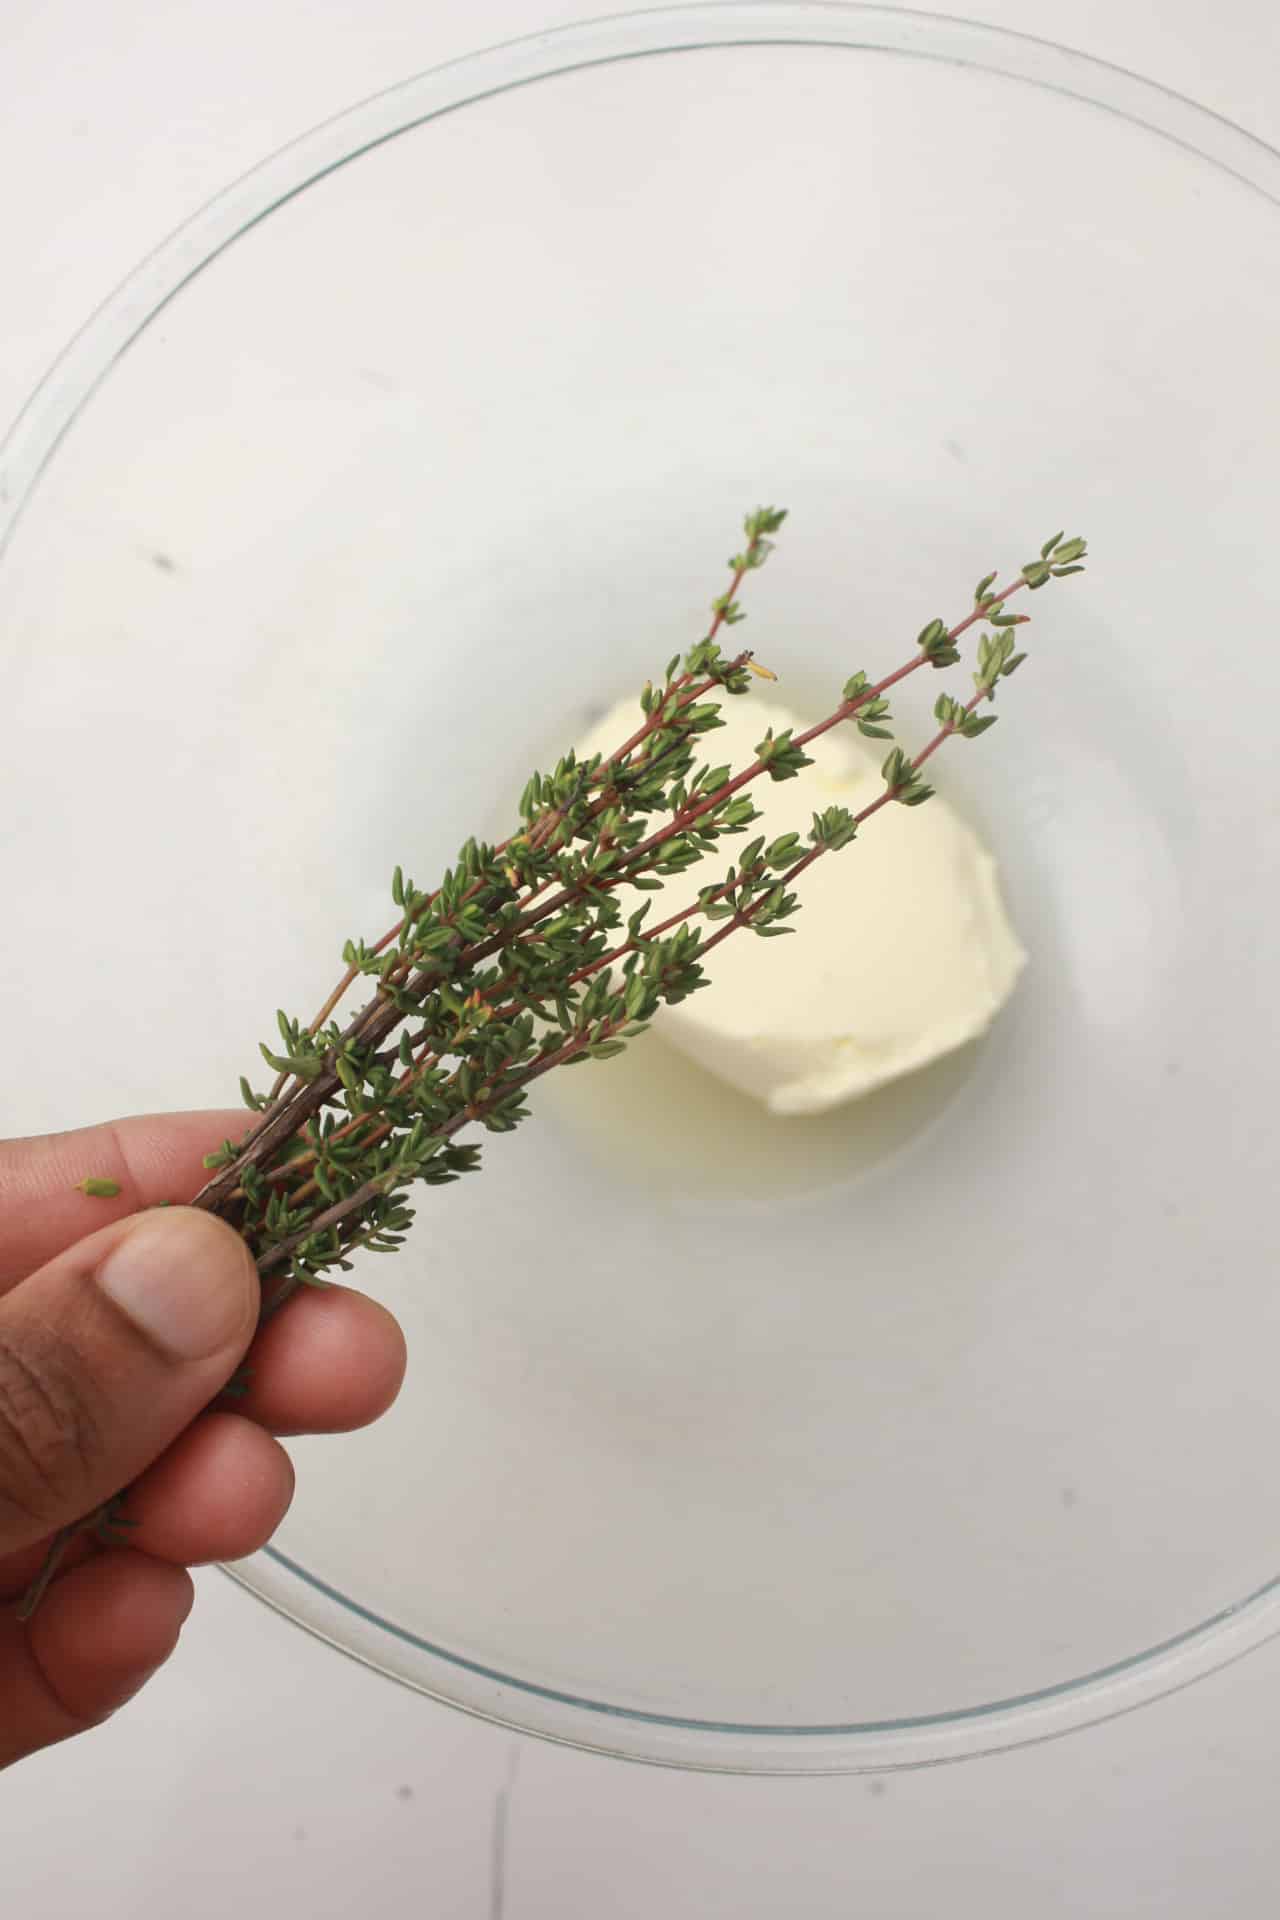 Putting thyme leaves in the bowl